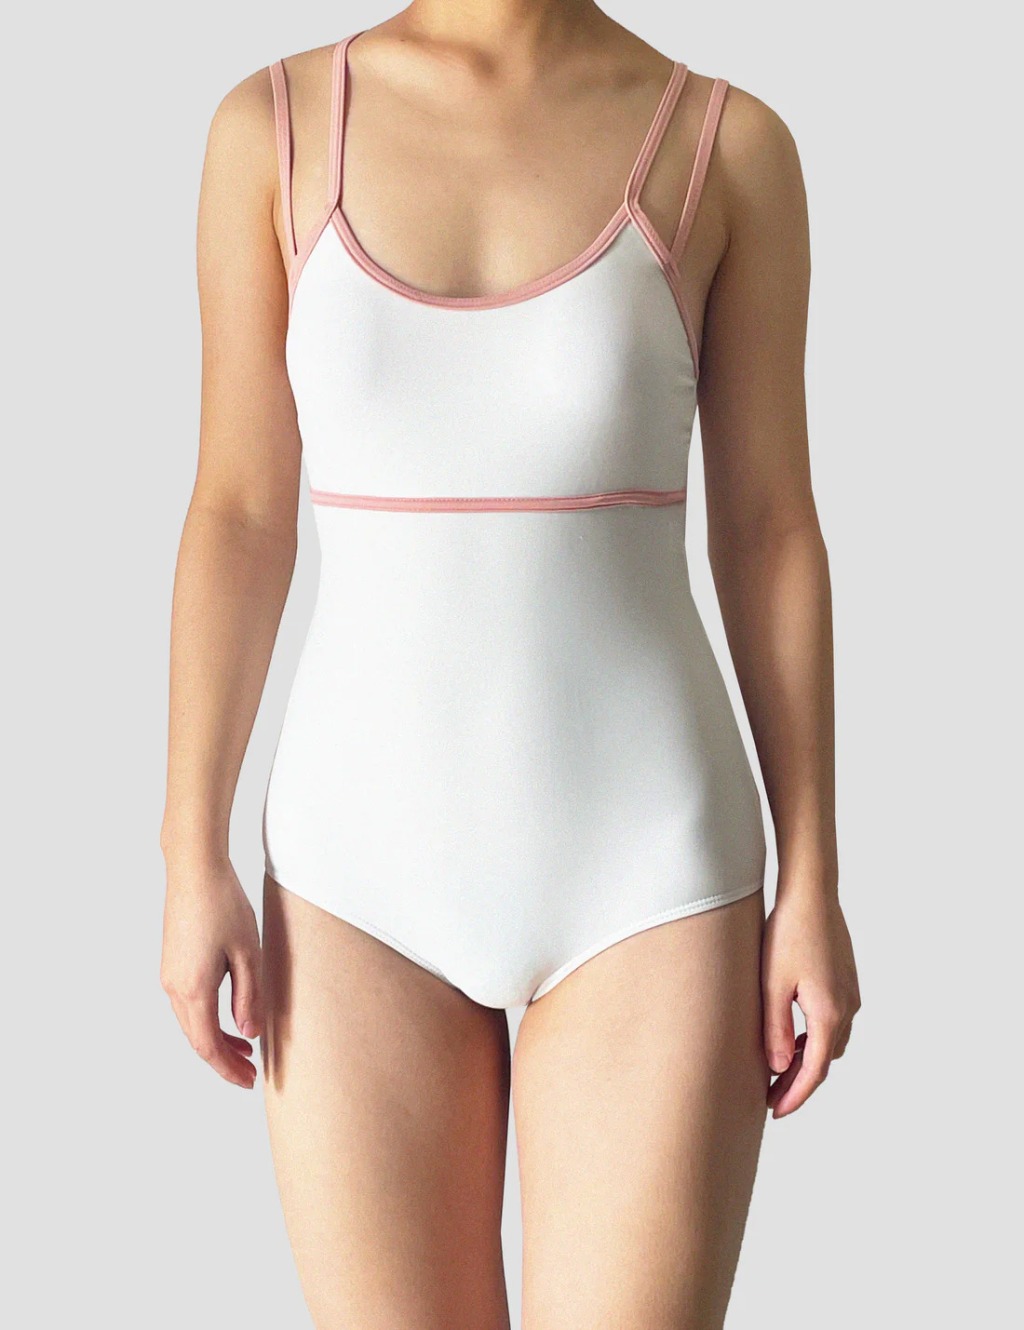 Important Facets Of Shopping For Swimwear That You Need To Know